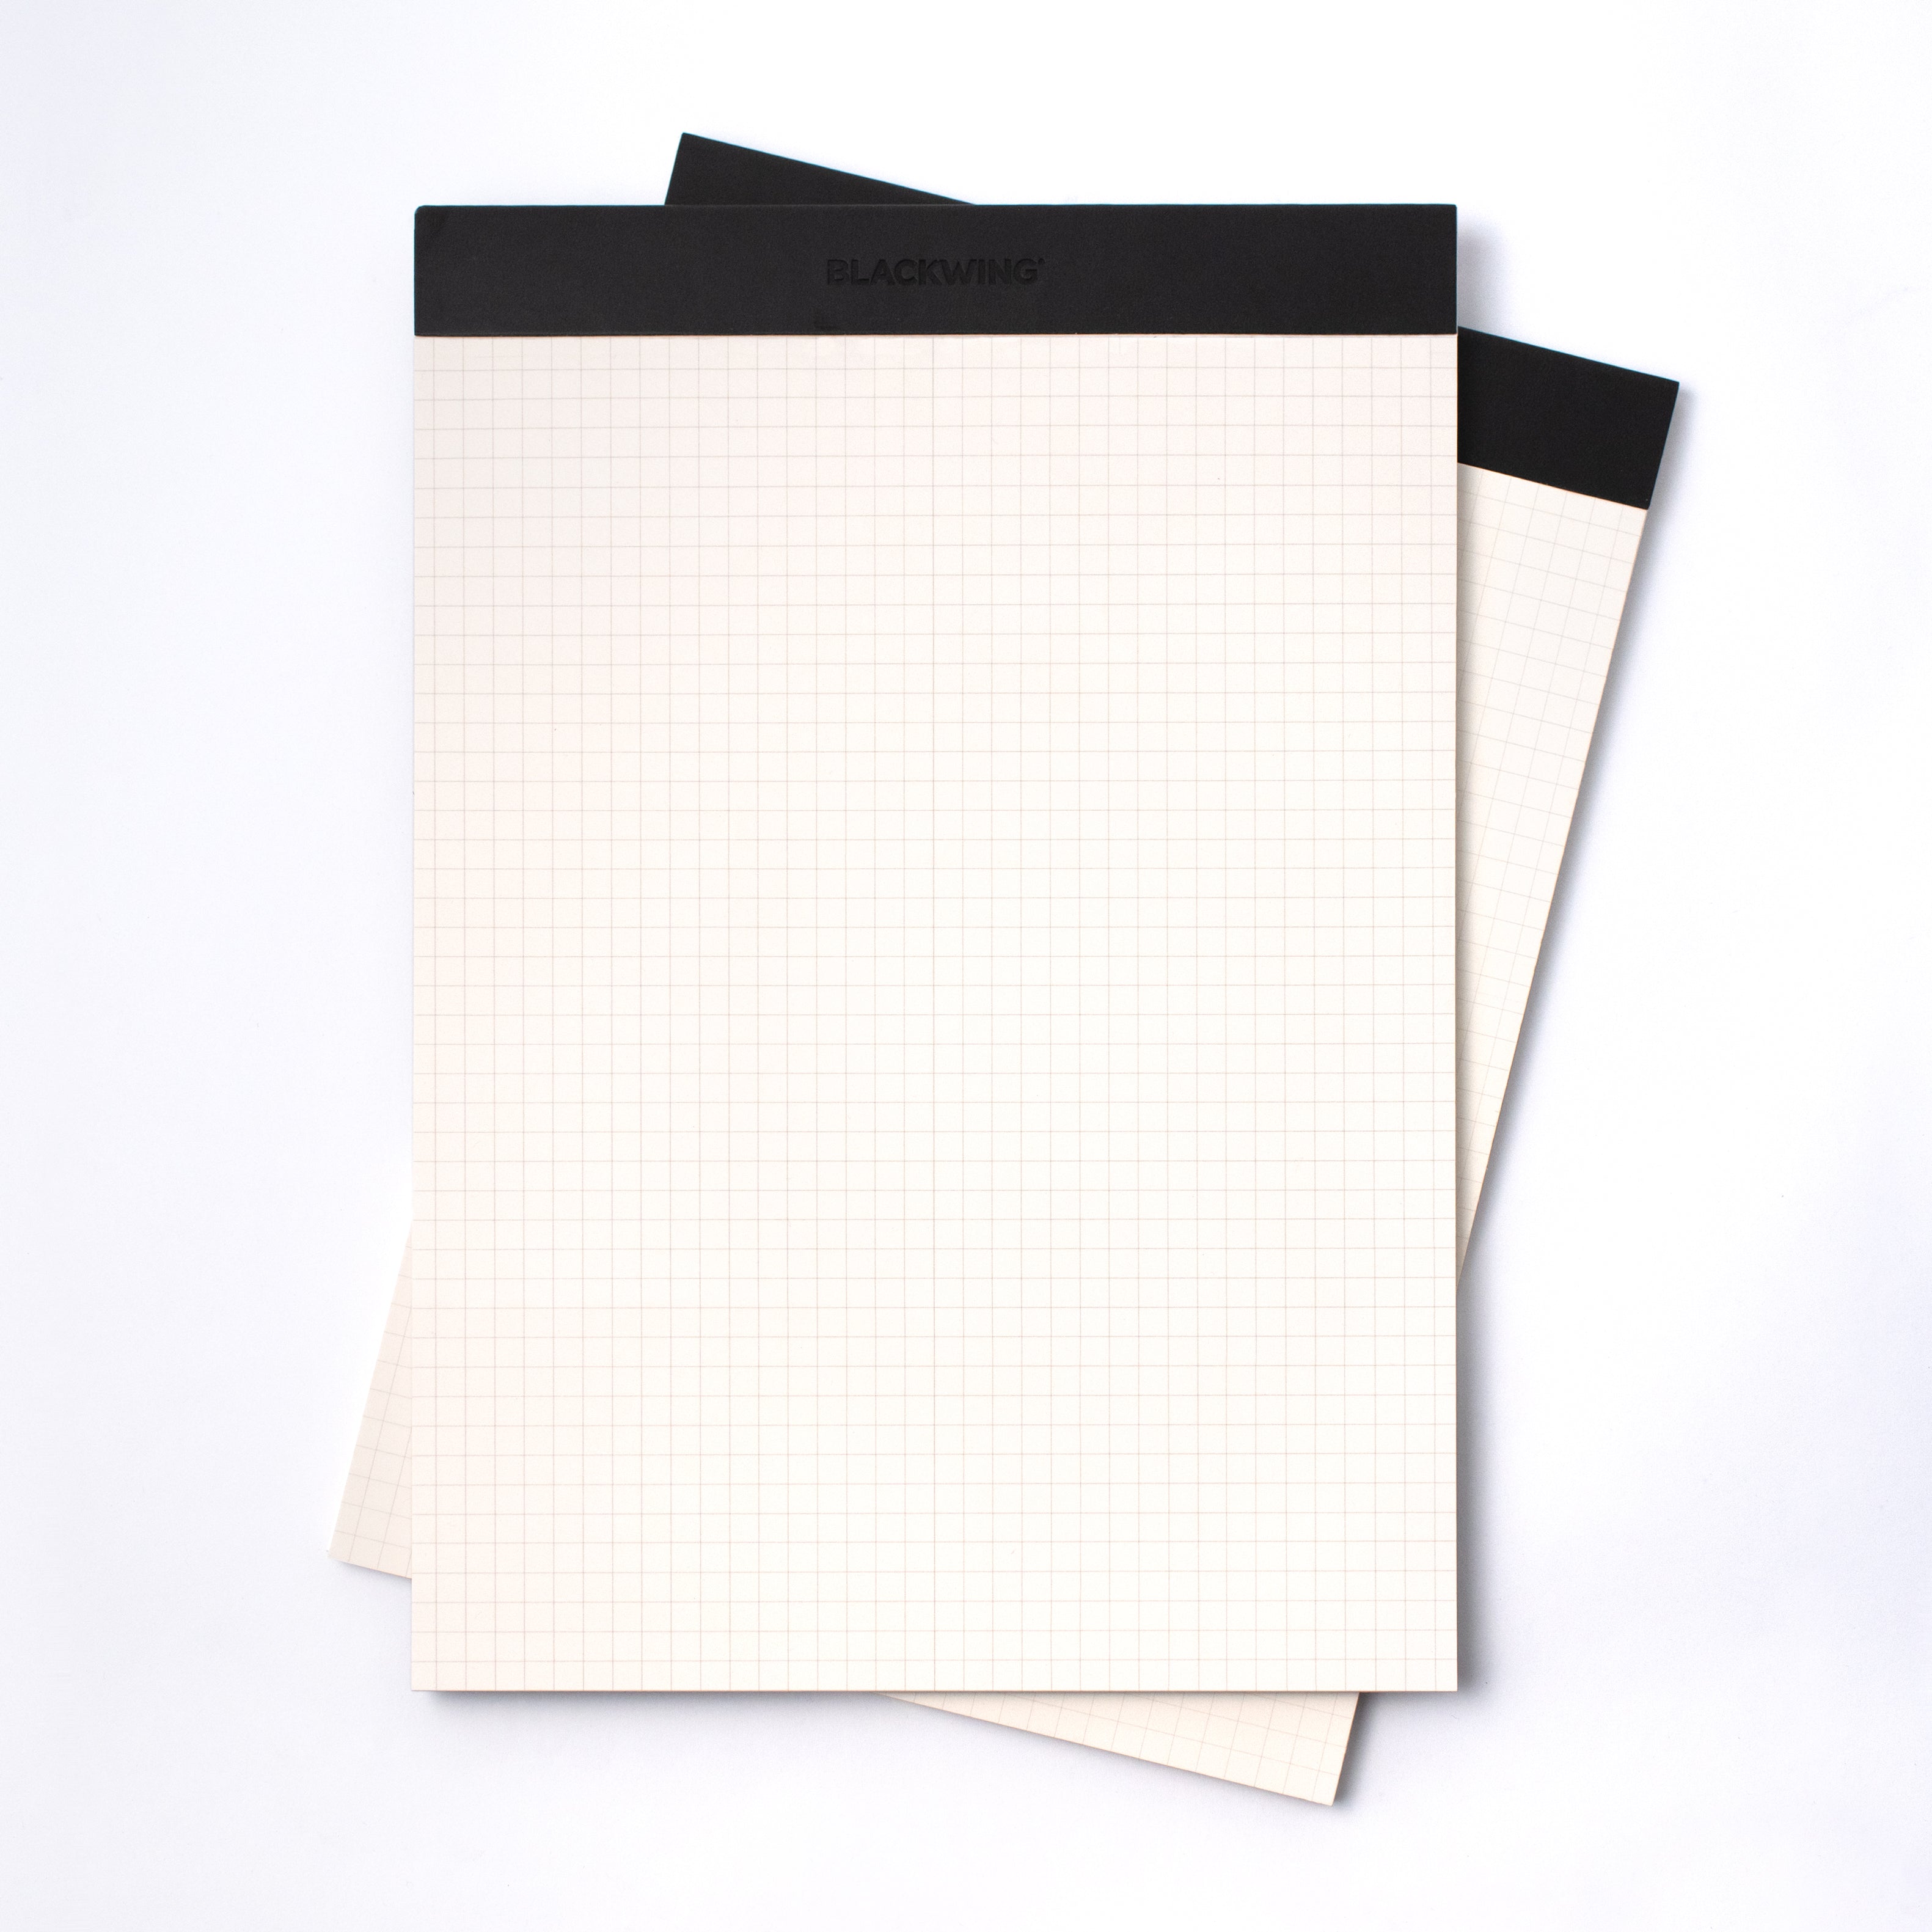 Two Blackwing Illegal Pads on a white background.